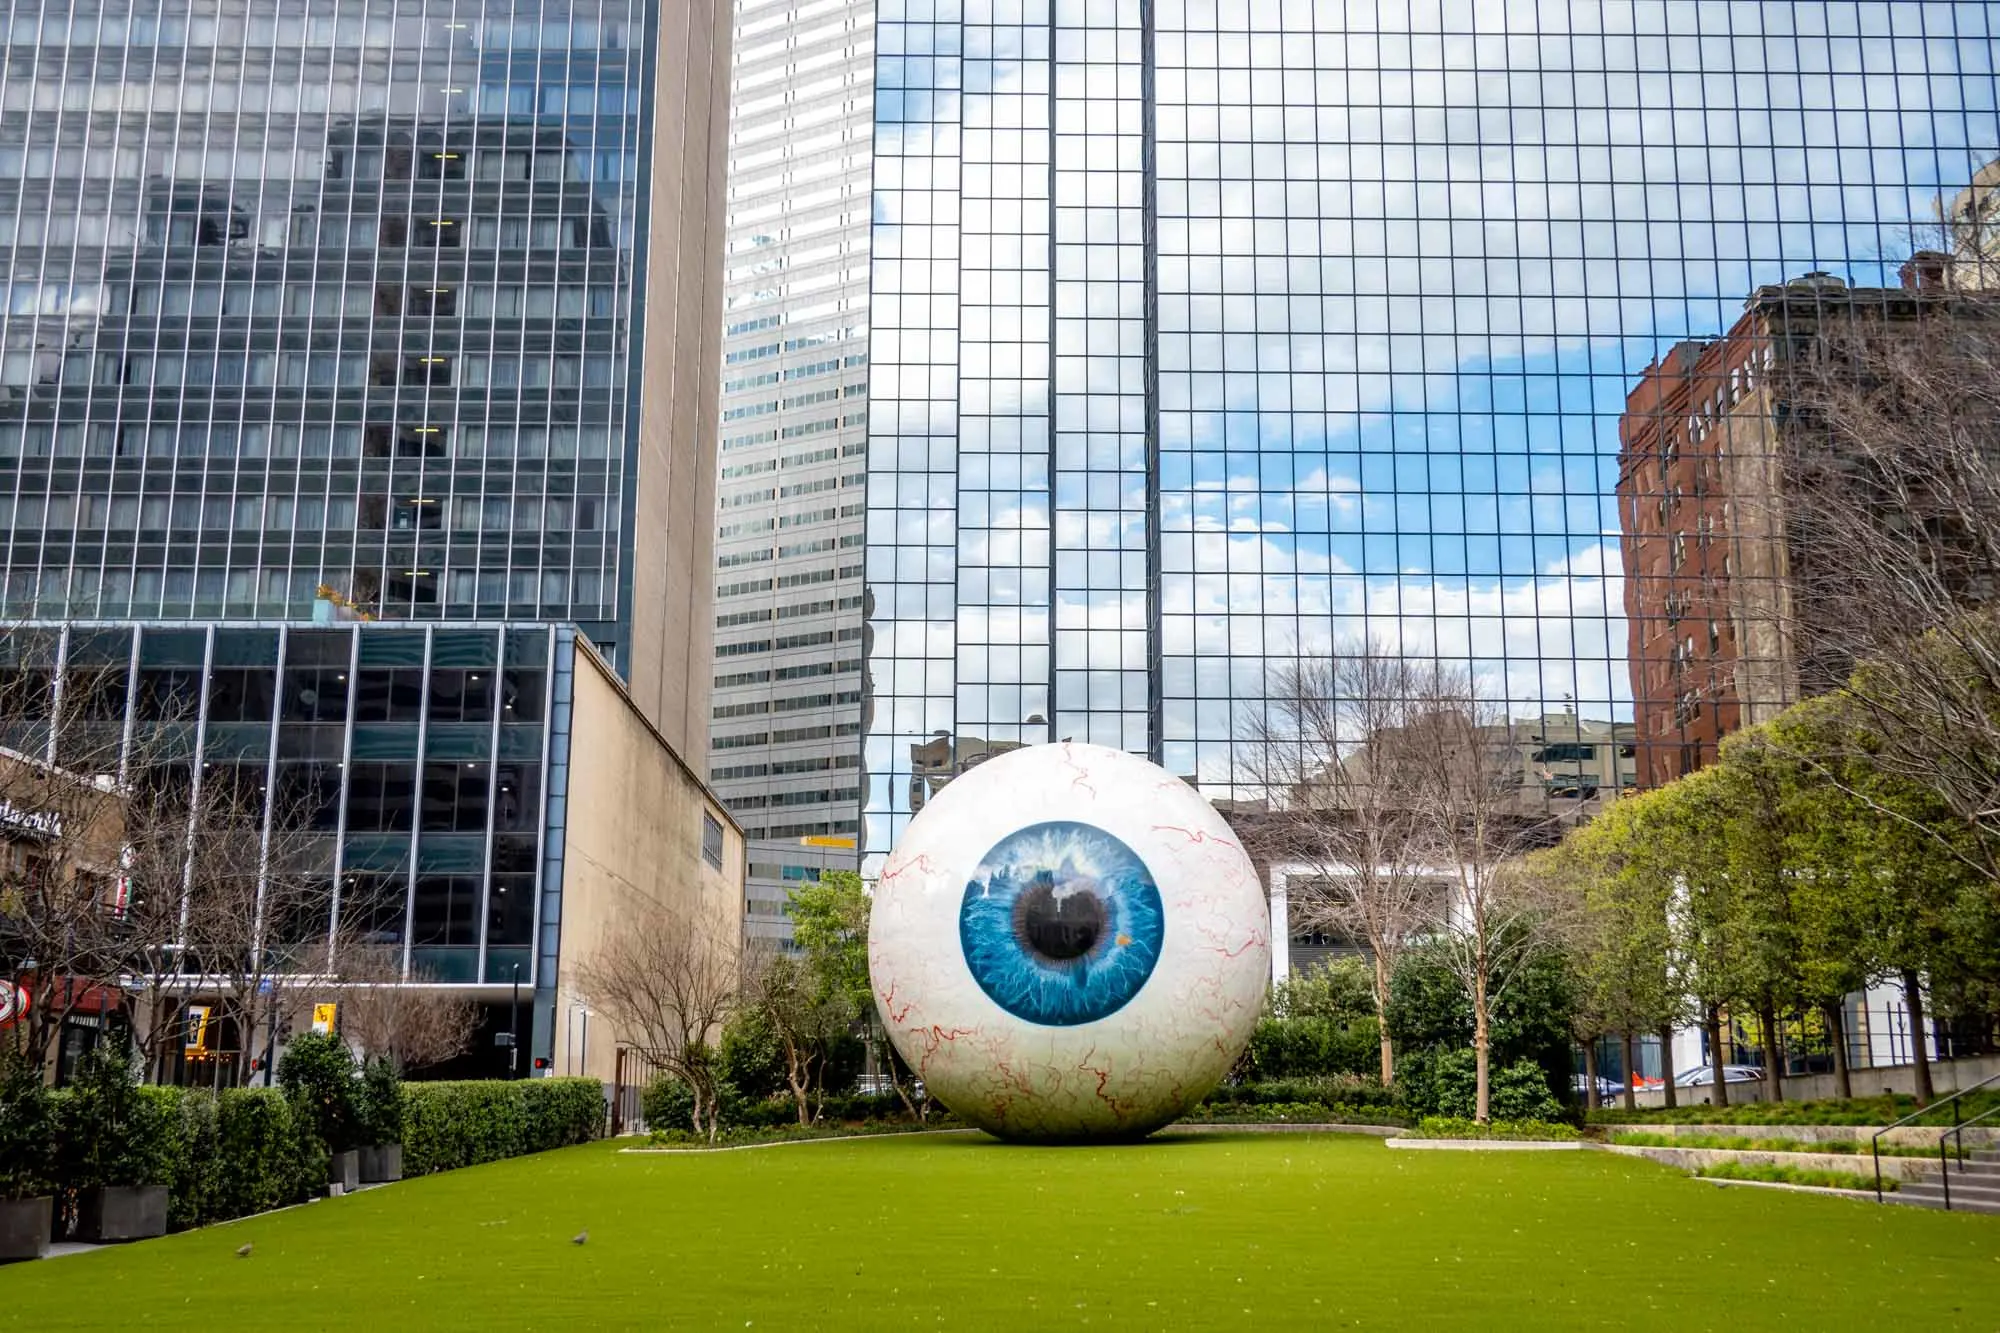 Giant eyeball sculpture on grass in front of office buildings